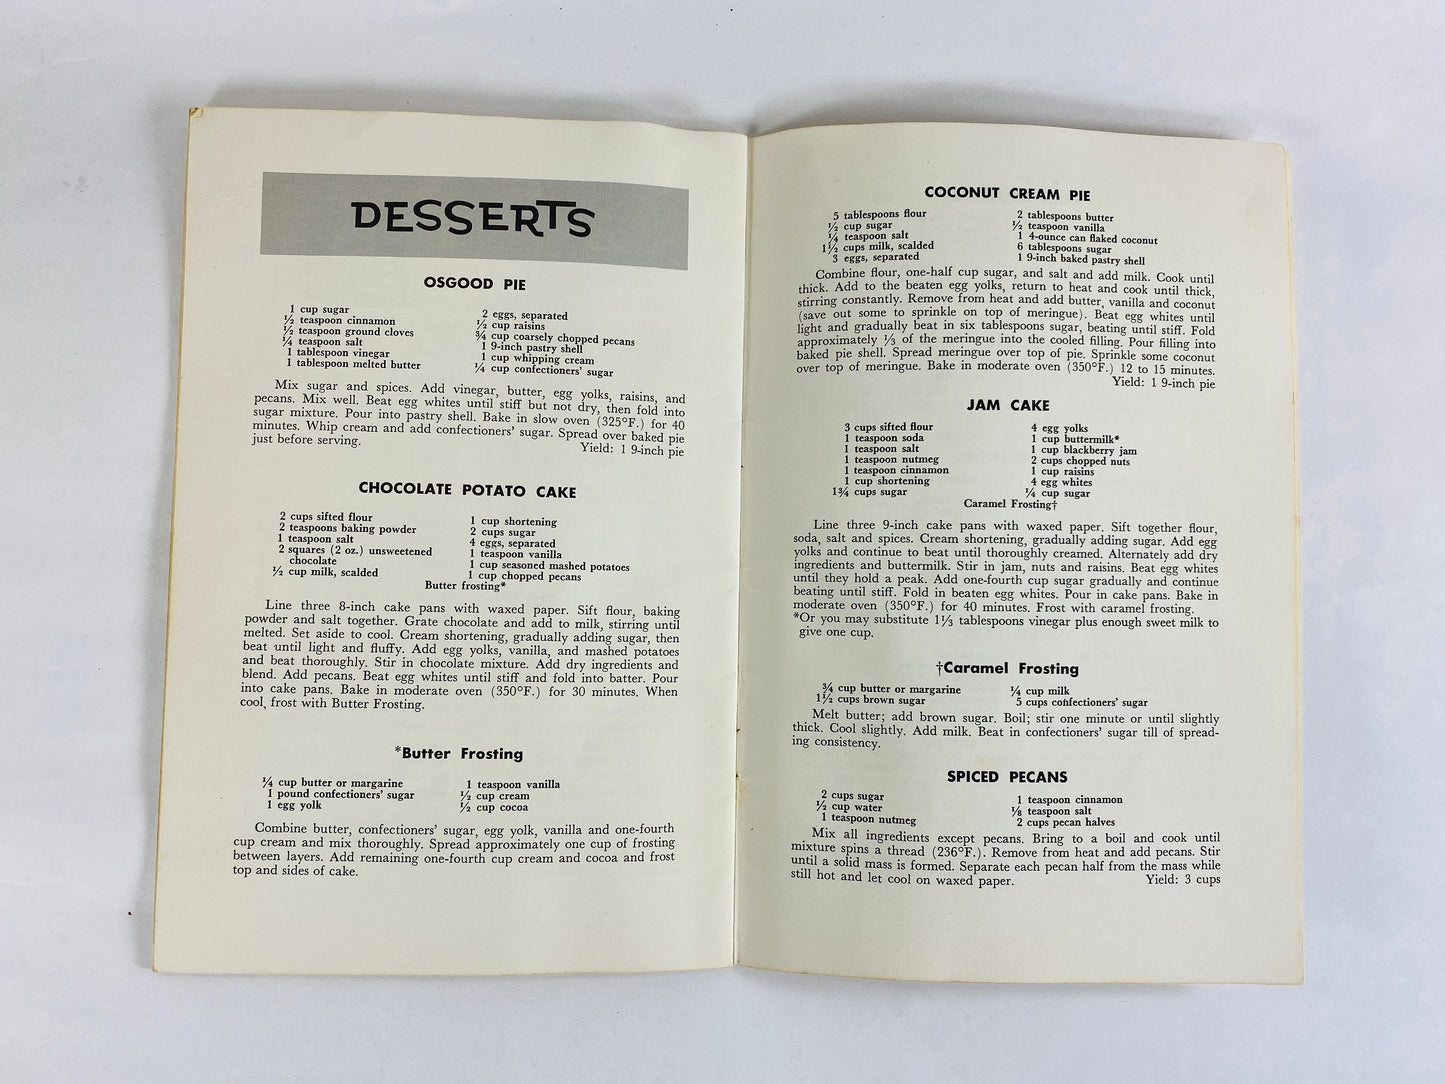 Recipes of the Southwest vintage Texas cookbook booklet. Chili con queso refridgerator salad guacamole, chicken loaf, corn meal mush, tamale